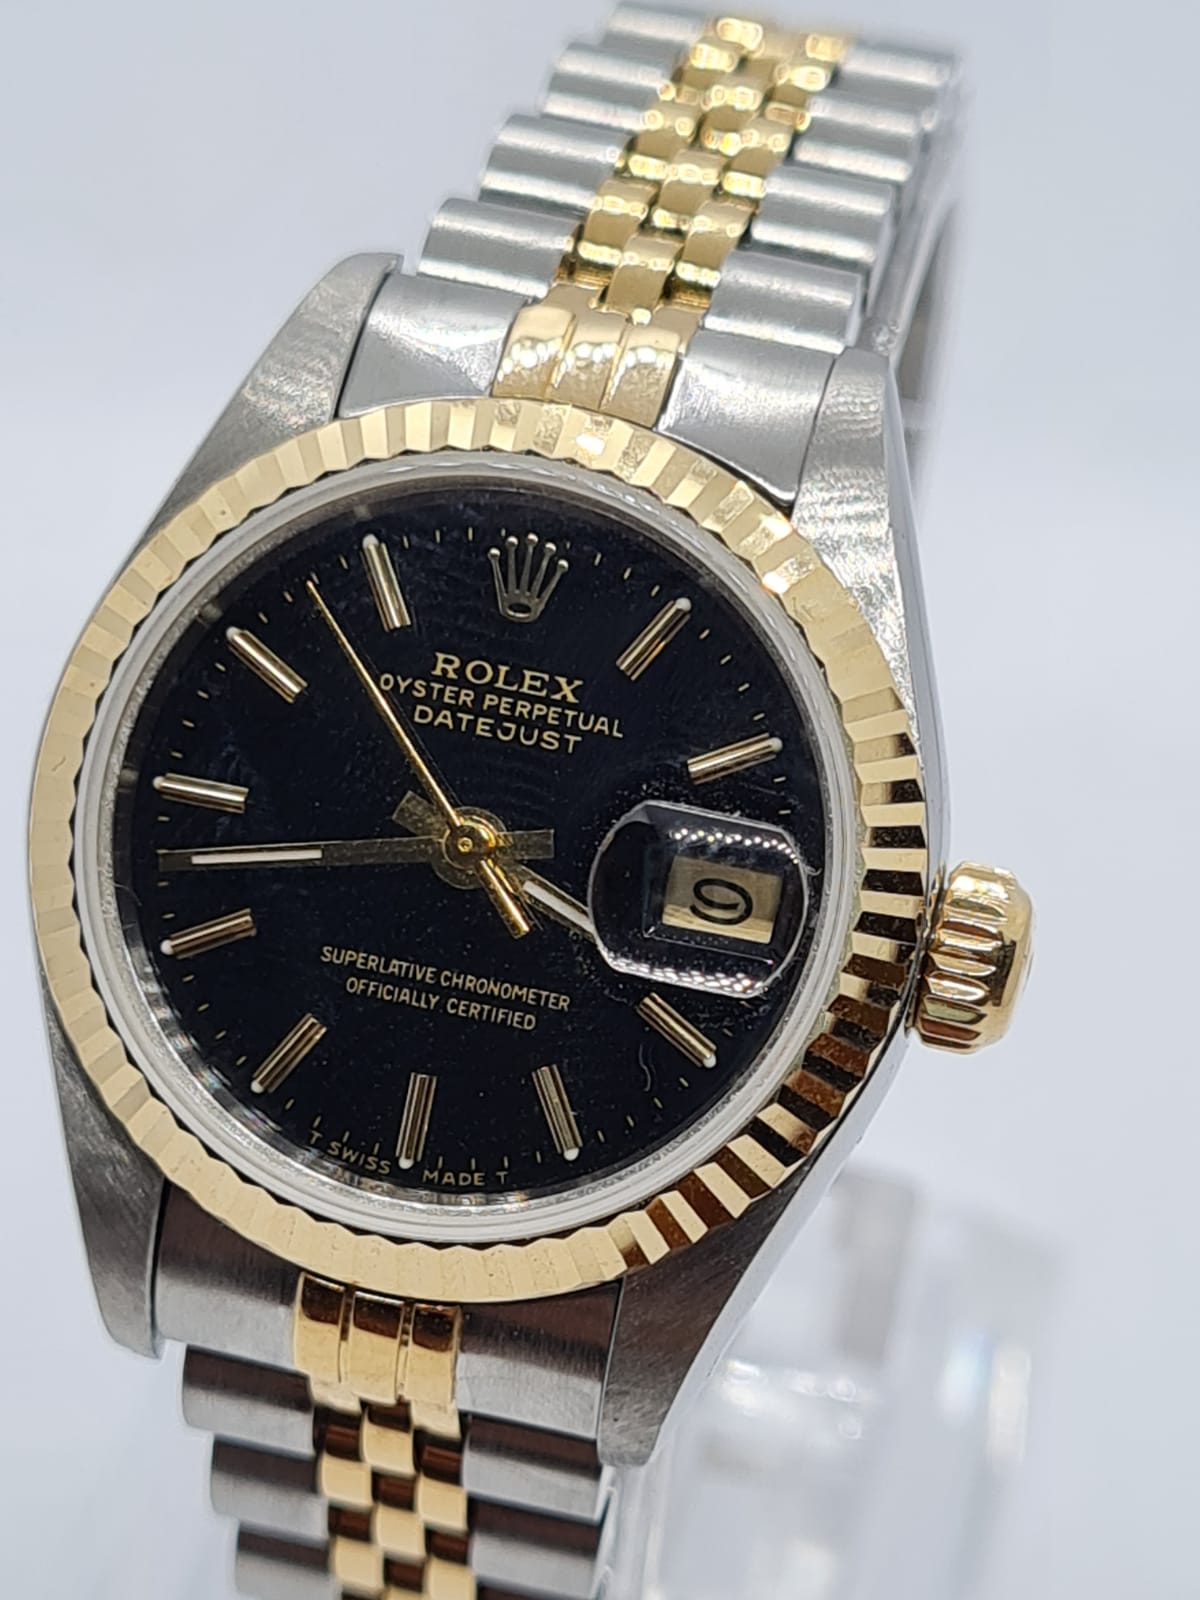 ROLEX Oyster Perpetual Datejust ladies watch with black face and two tone steel strap, 22mm case - Image 3 of 19